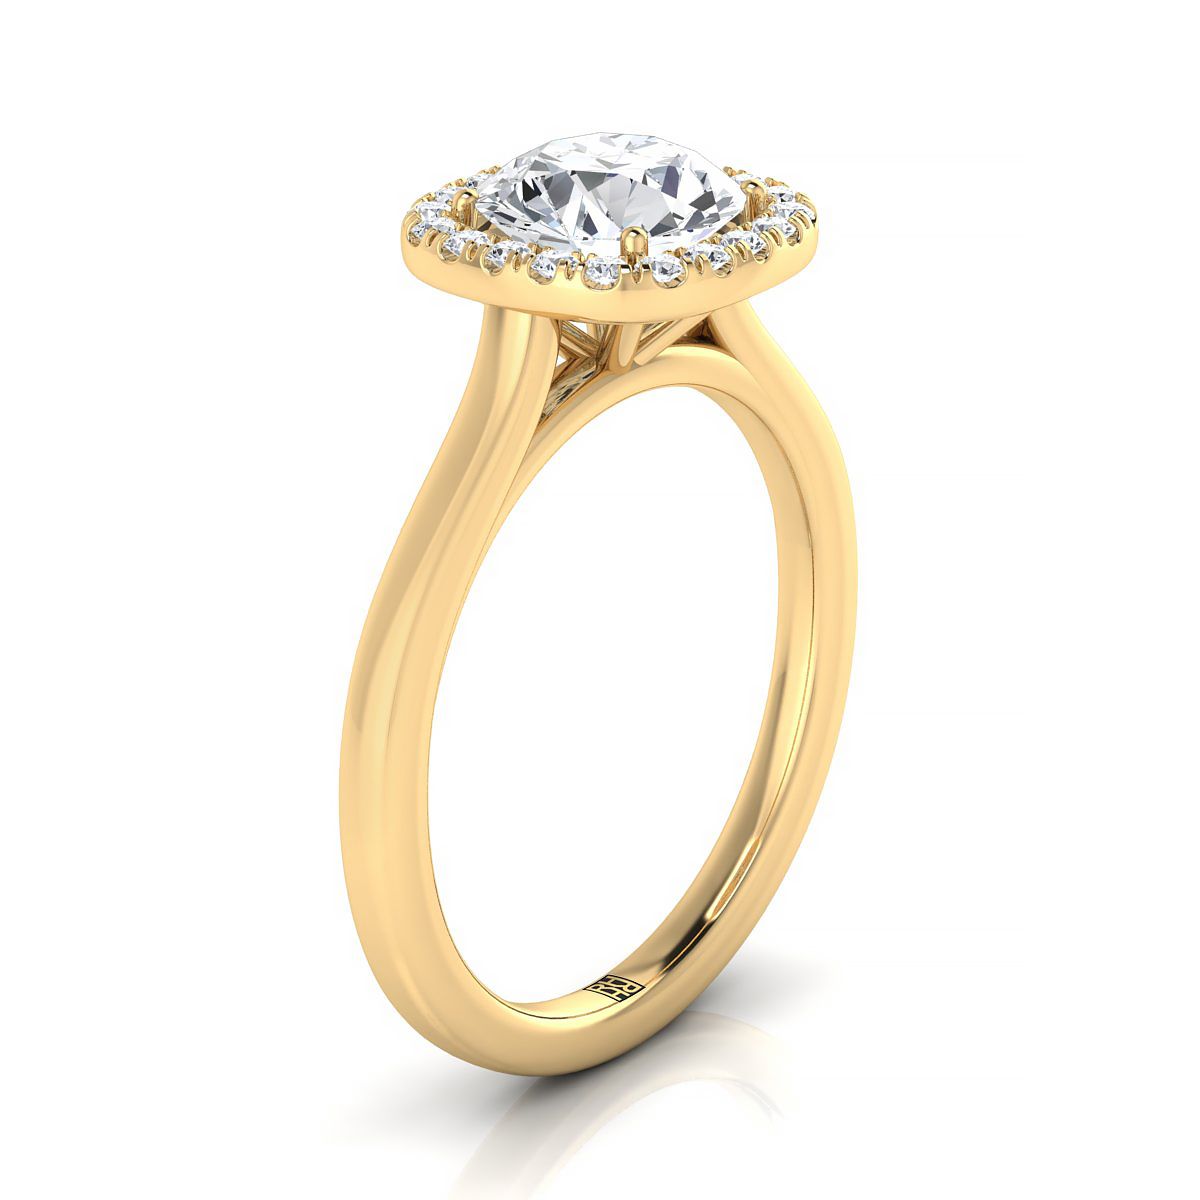 14K Yellow Gold Round Brilliant Diamond Modern Halo French Pave Engagement Ring -1/6ctw